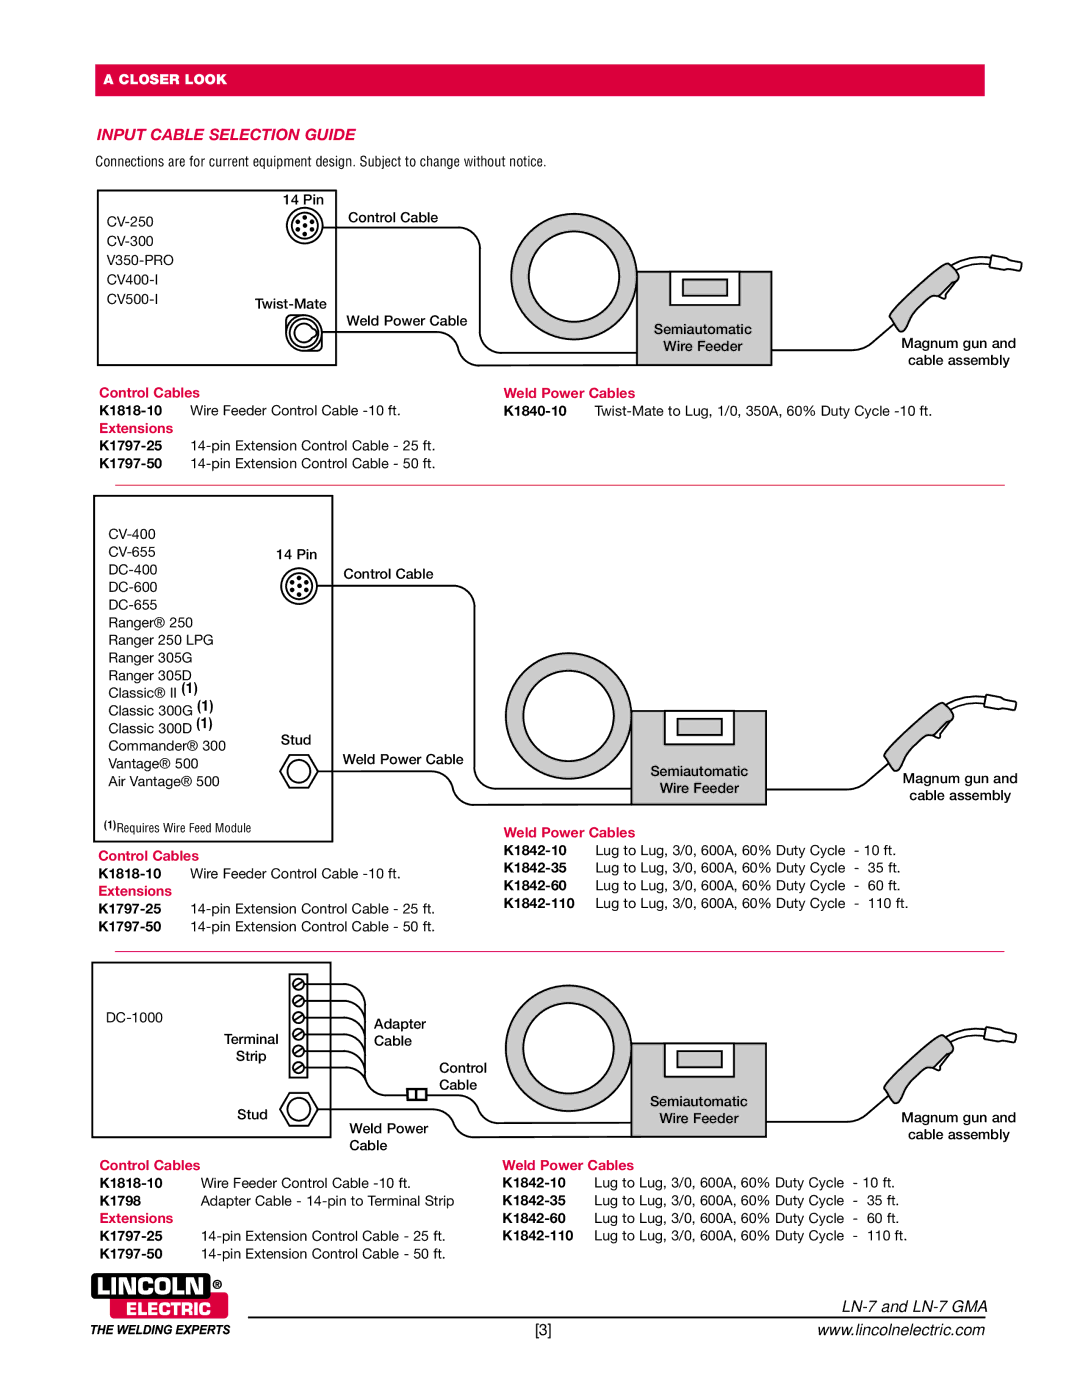 Lincoln Electric LN-7 GMA Input Cable Selection Guide, Control Cables, Weld Power Cables, Extensions 